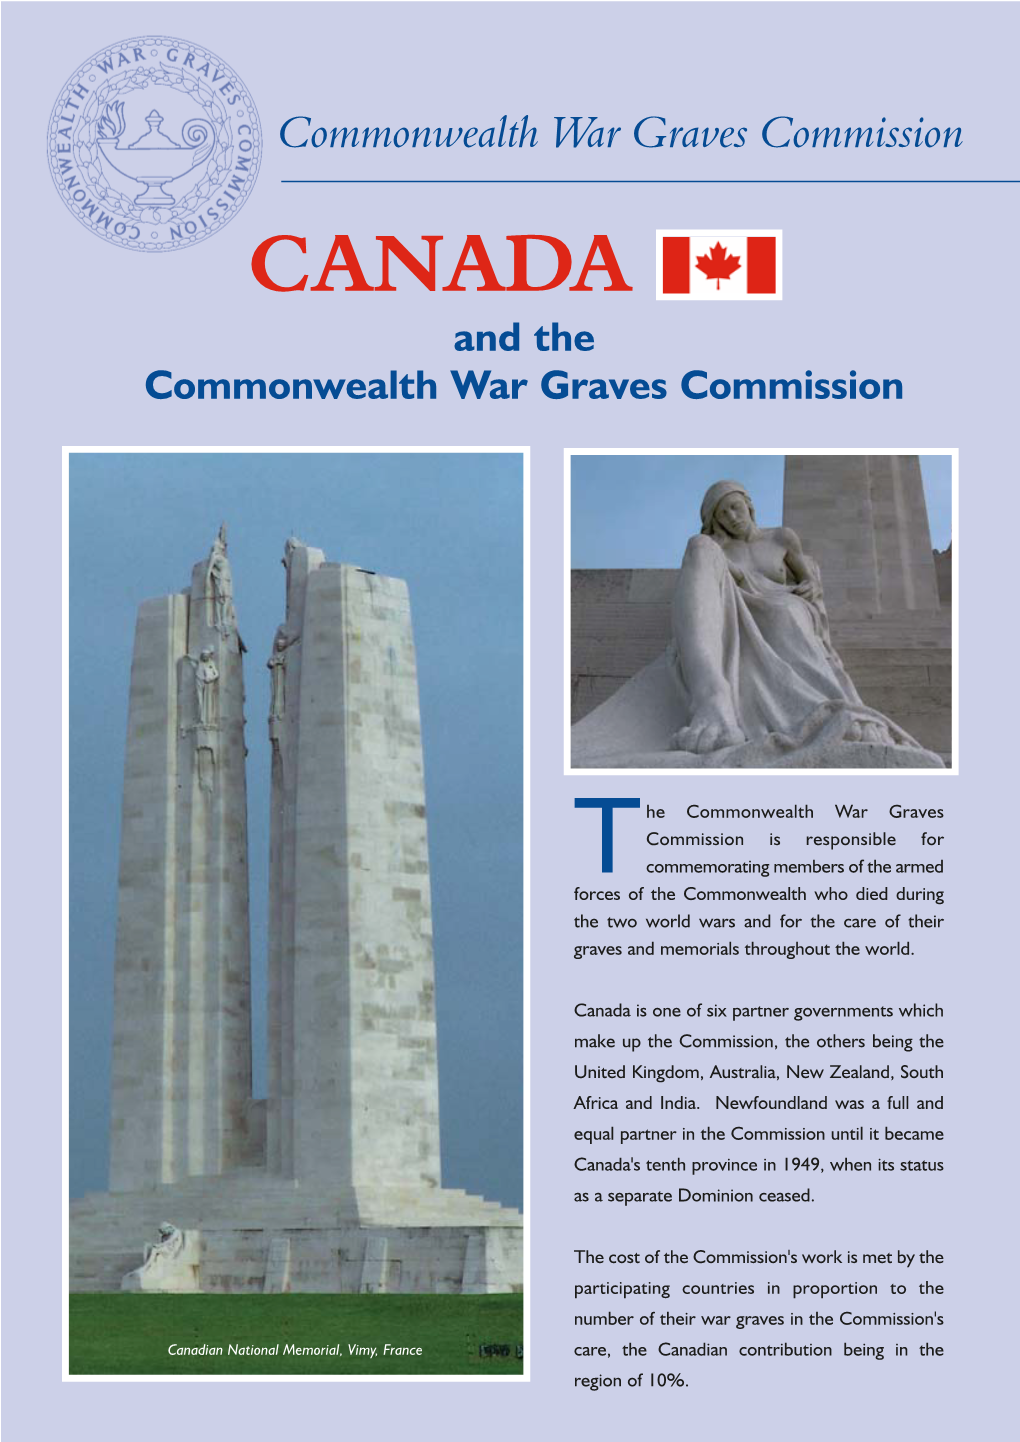 Canada and the CWGC